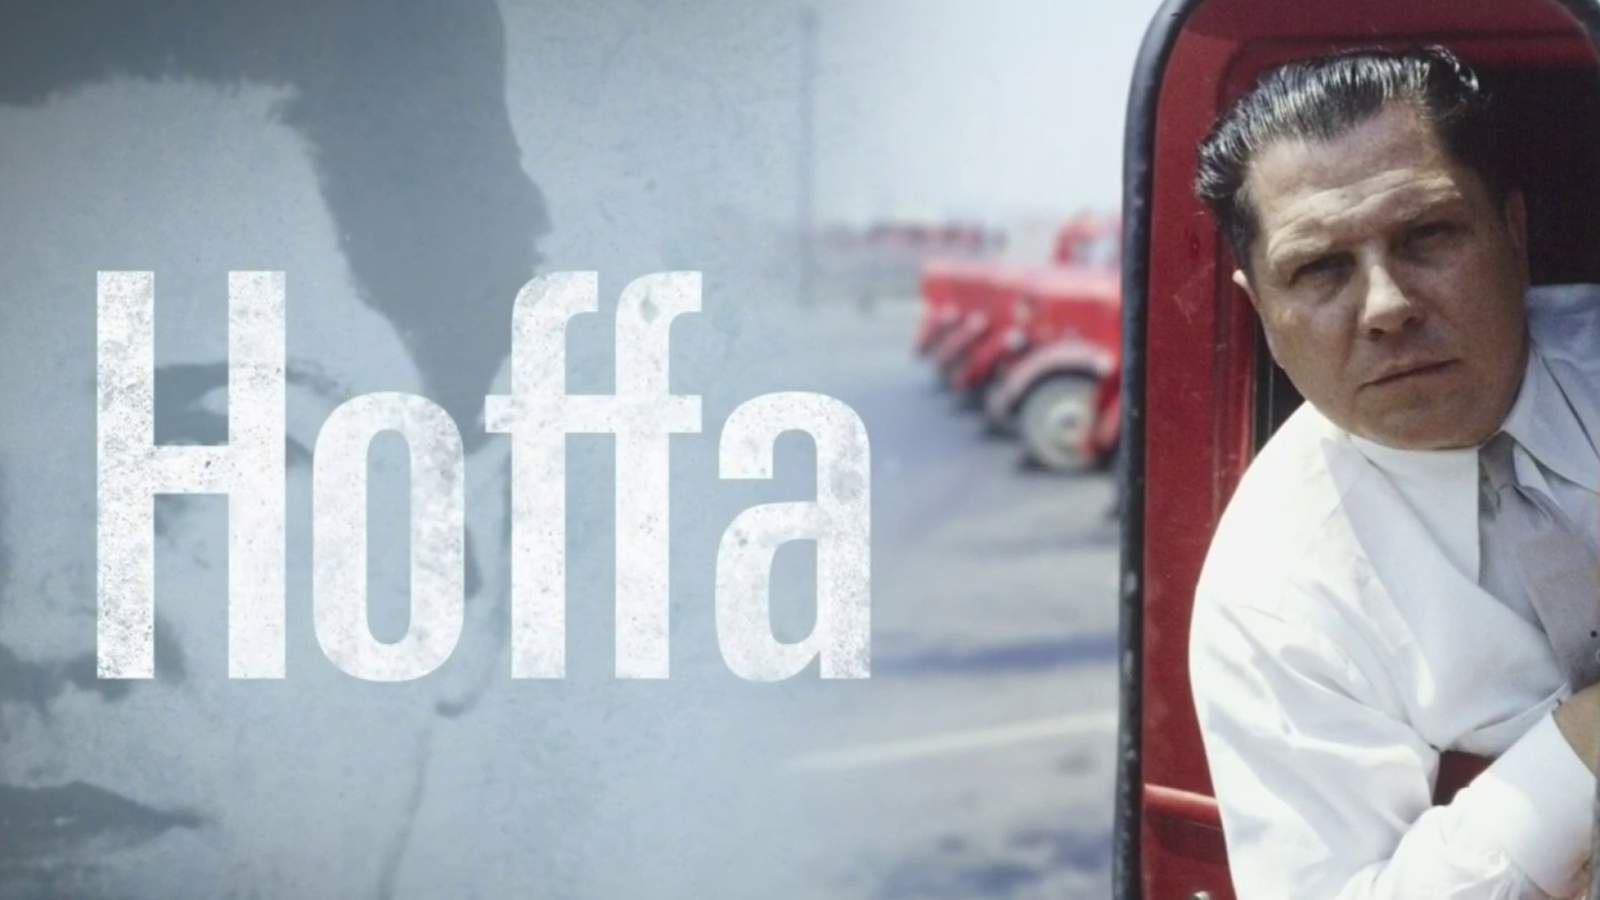 WATCH: ‘Hoffa’ -- the rise and fall of the iconic labor leader